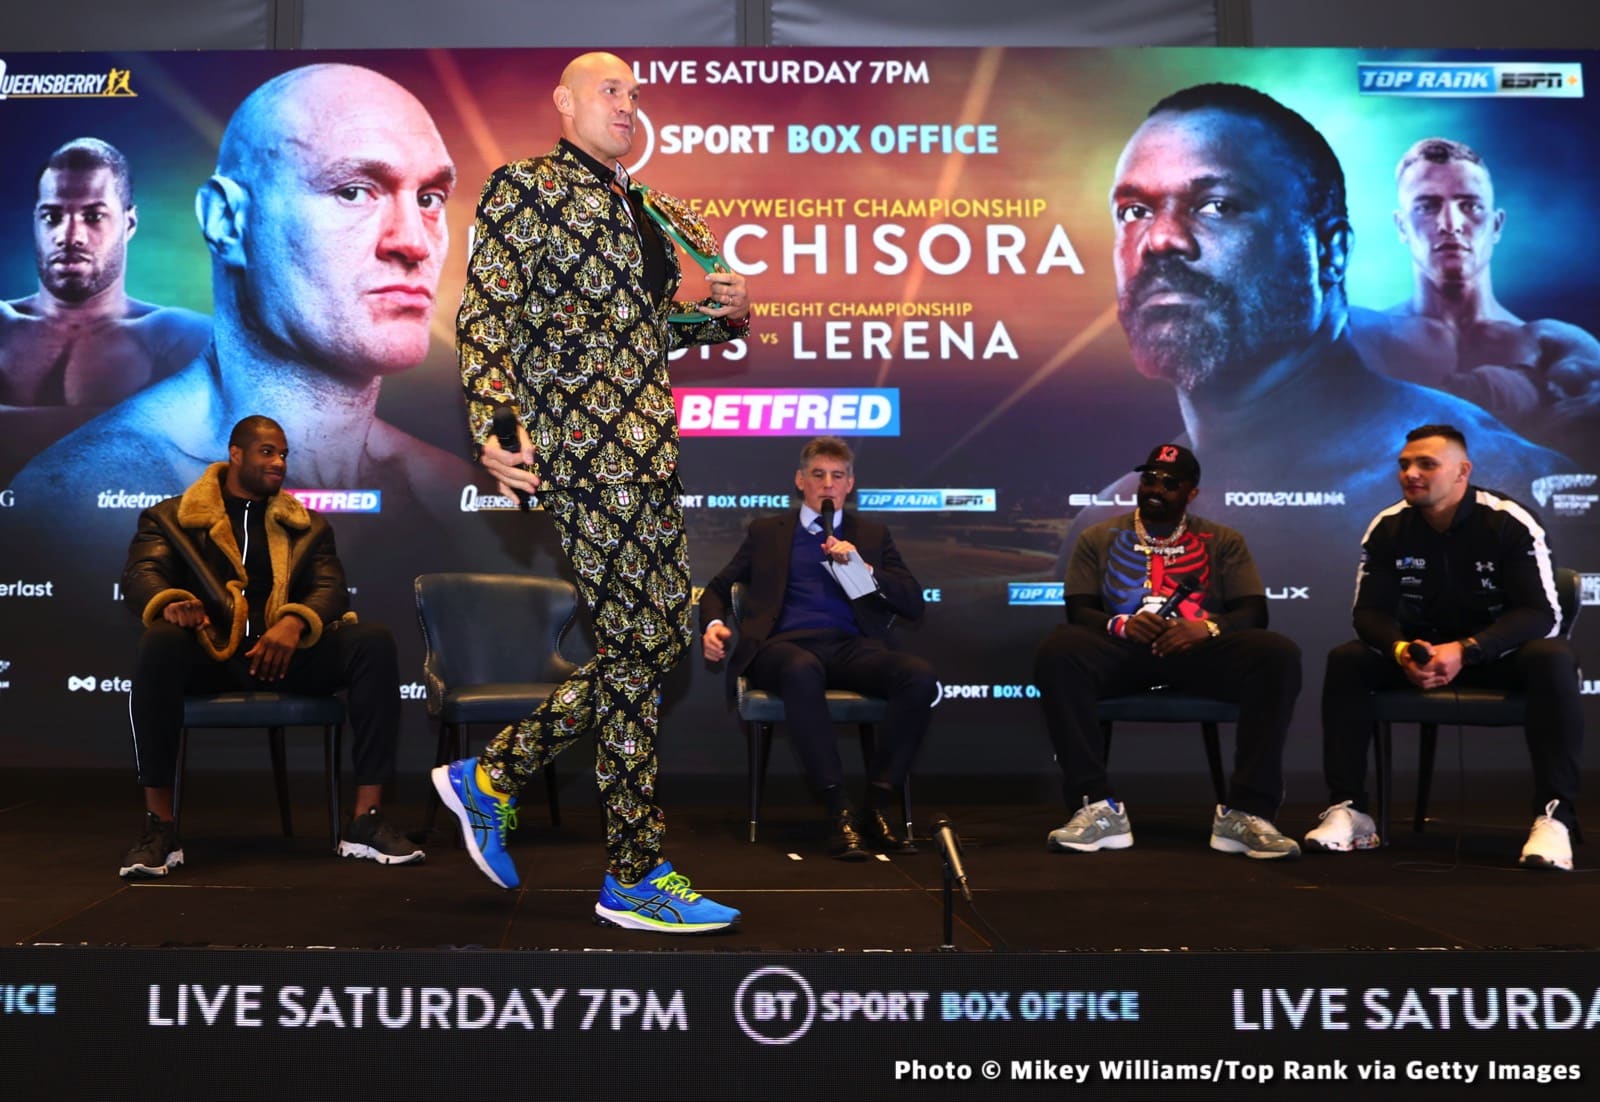 WATCH LIVE: Fury - Chisora 3: Weigh In